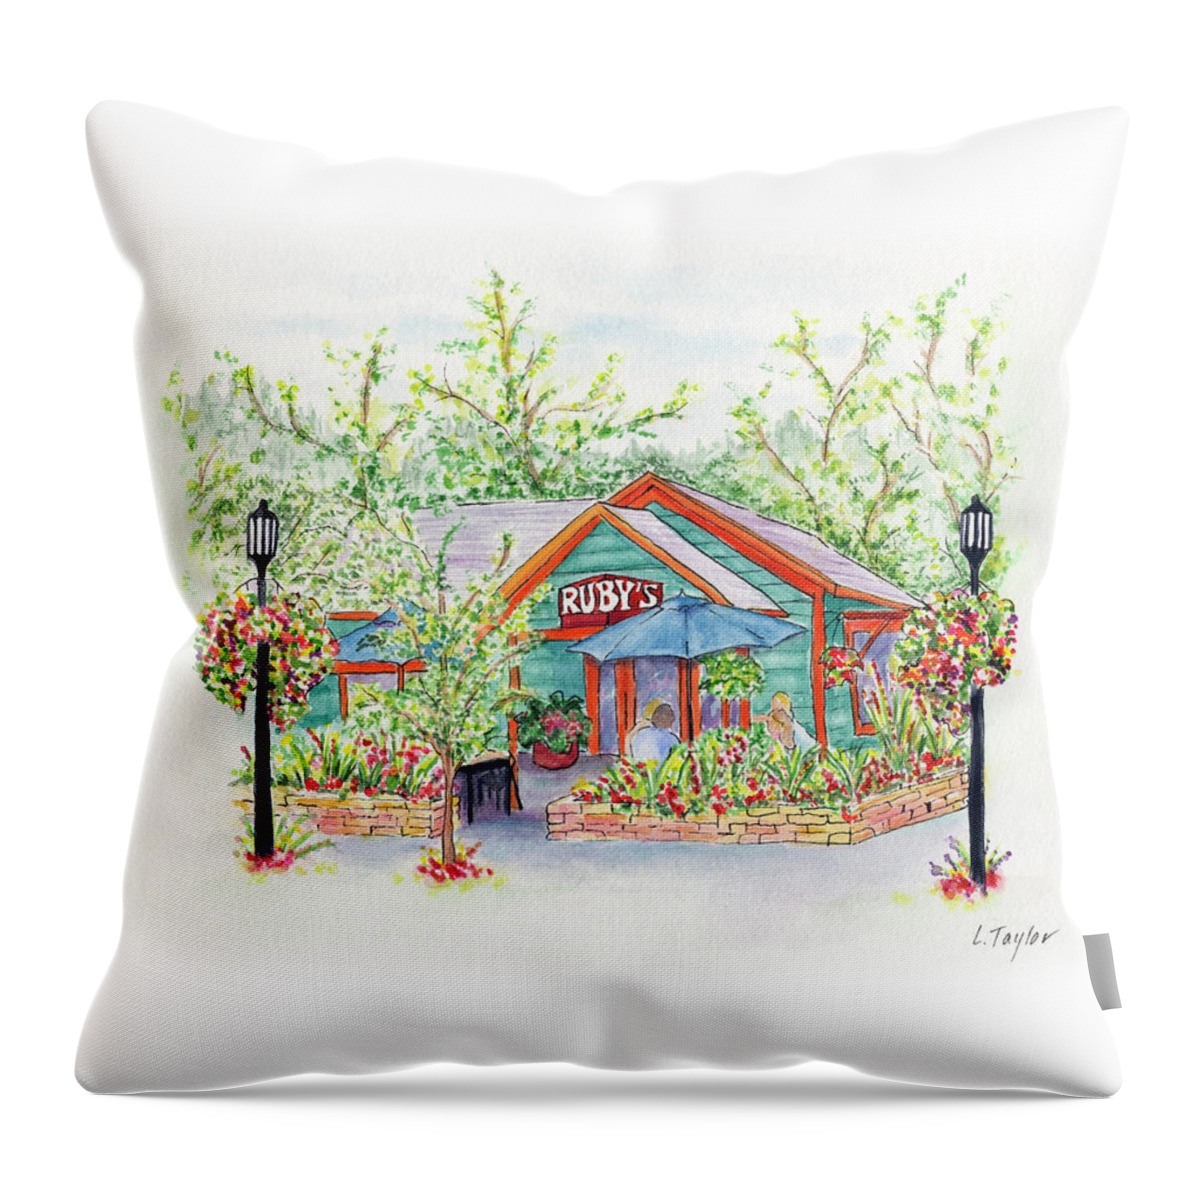 Ruby's Throw Pillow featuring the painting Ruby's by Lori Taylor